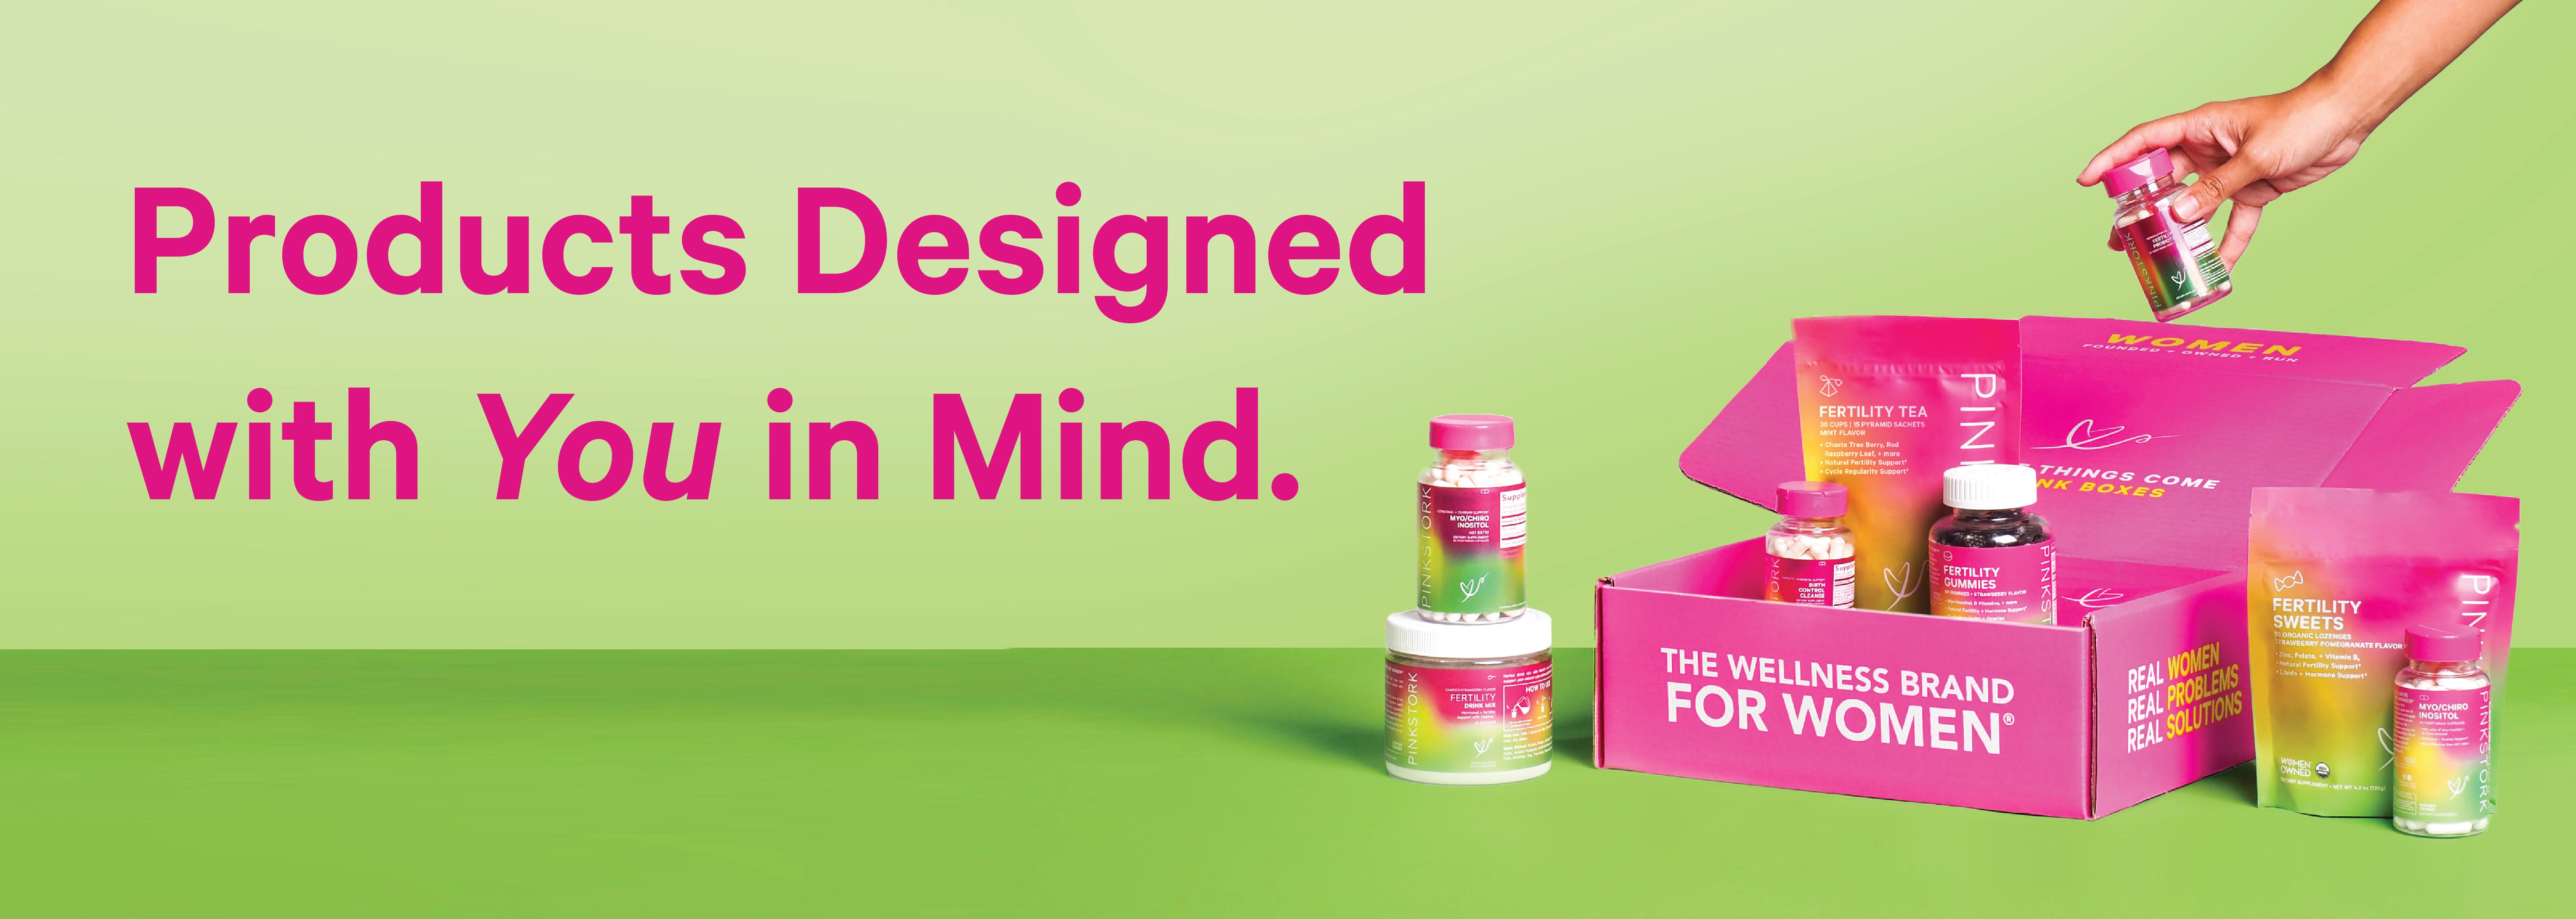 Products designed with you in mind. Image is of a Pink Stork packaging box with Pink Stork products inside.